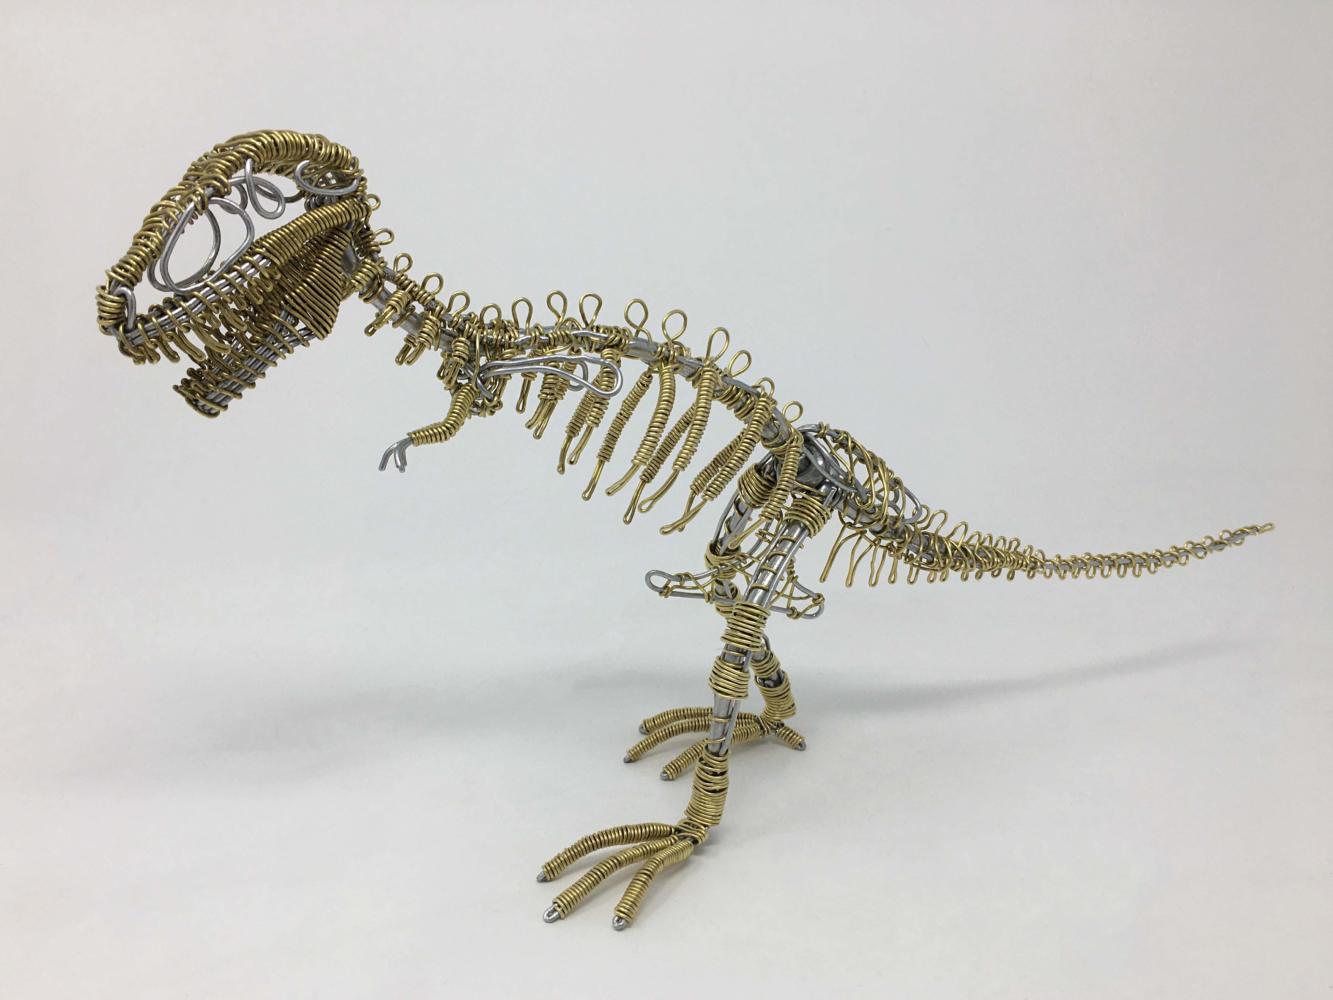 Miniature tyrannosaurus rex skeleton made of copper and silver wire